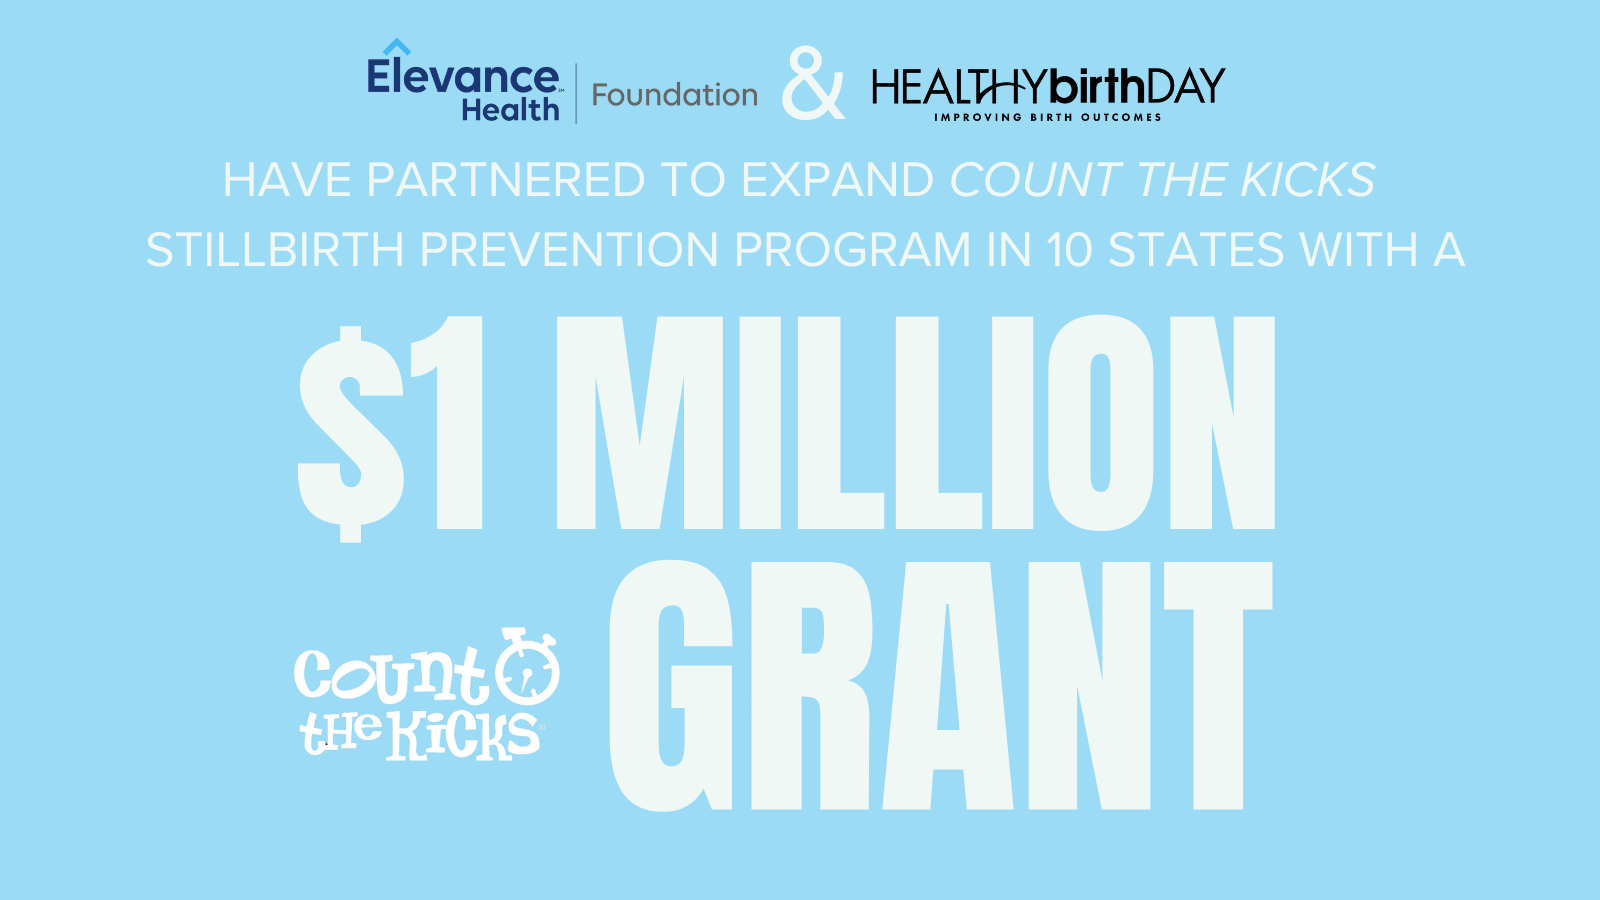 Elevance Health Foundation Grant will Expand Count the Kicks Program in 10 States